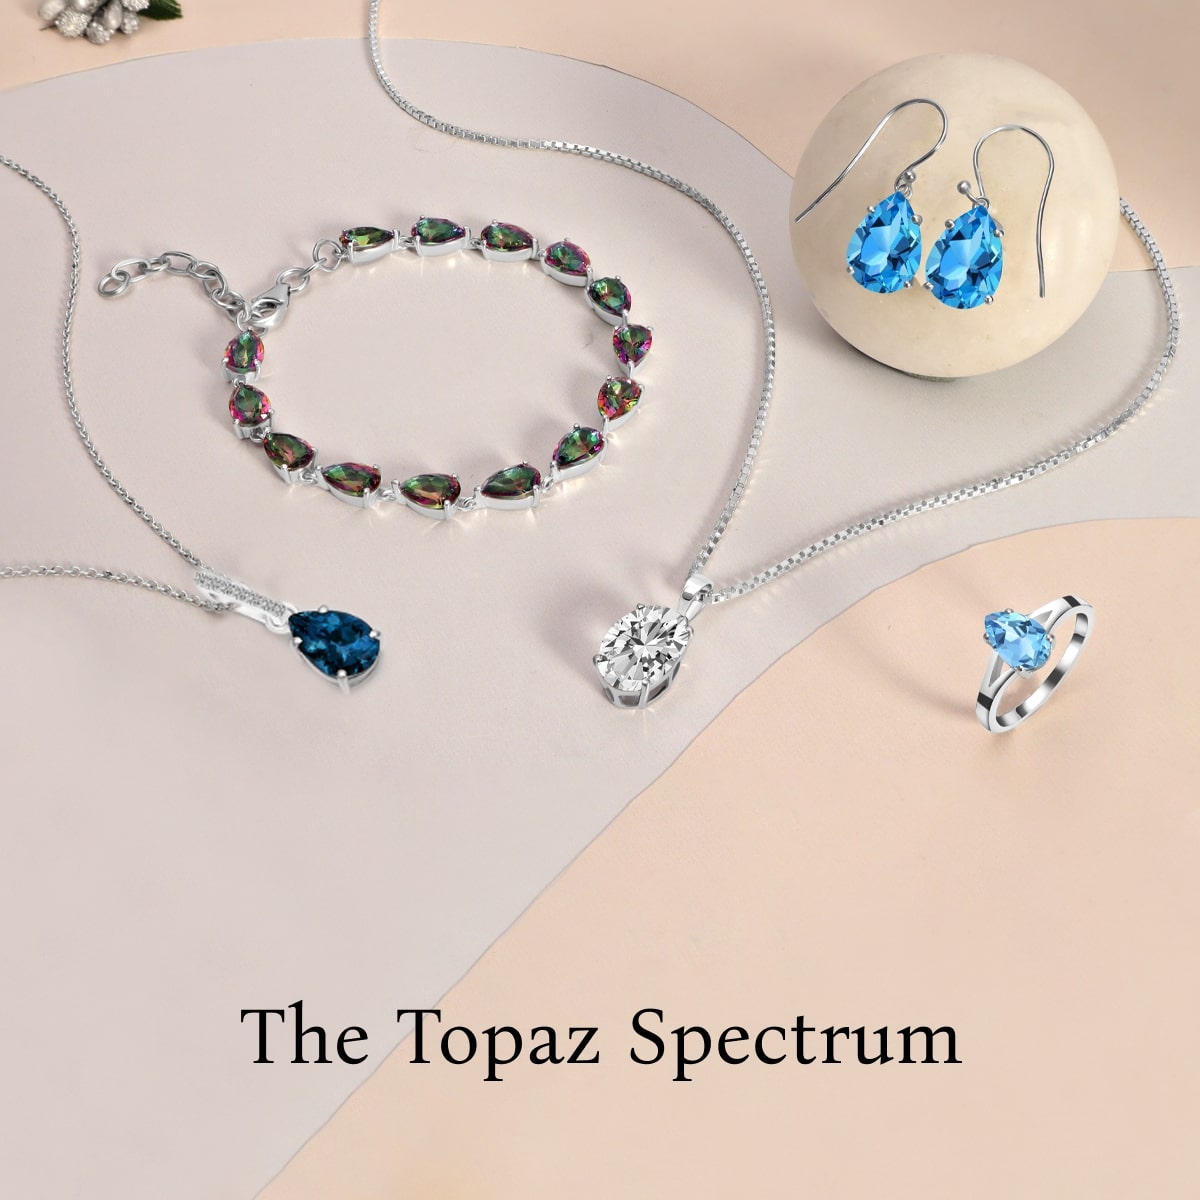 Types of Topaz Stone and Their Healing Properties